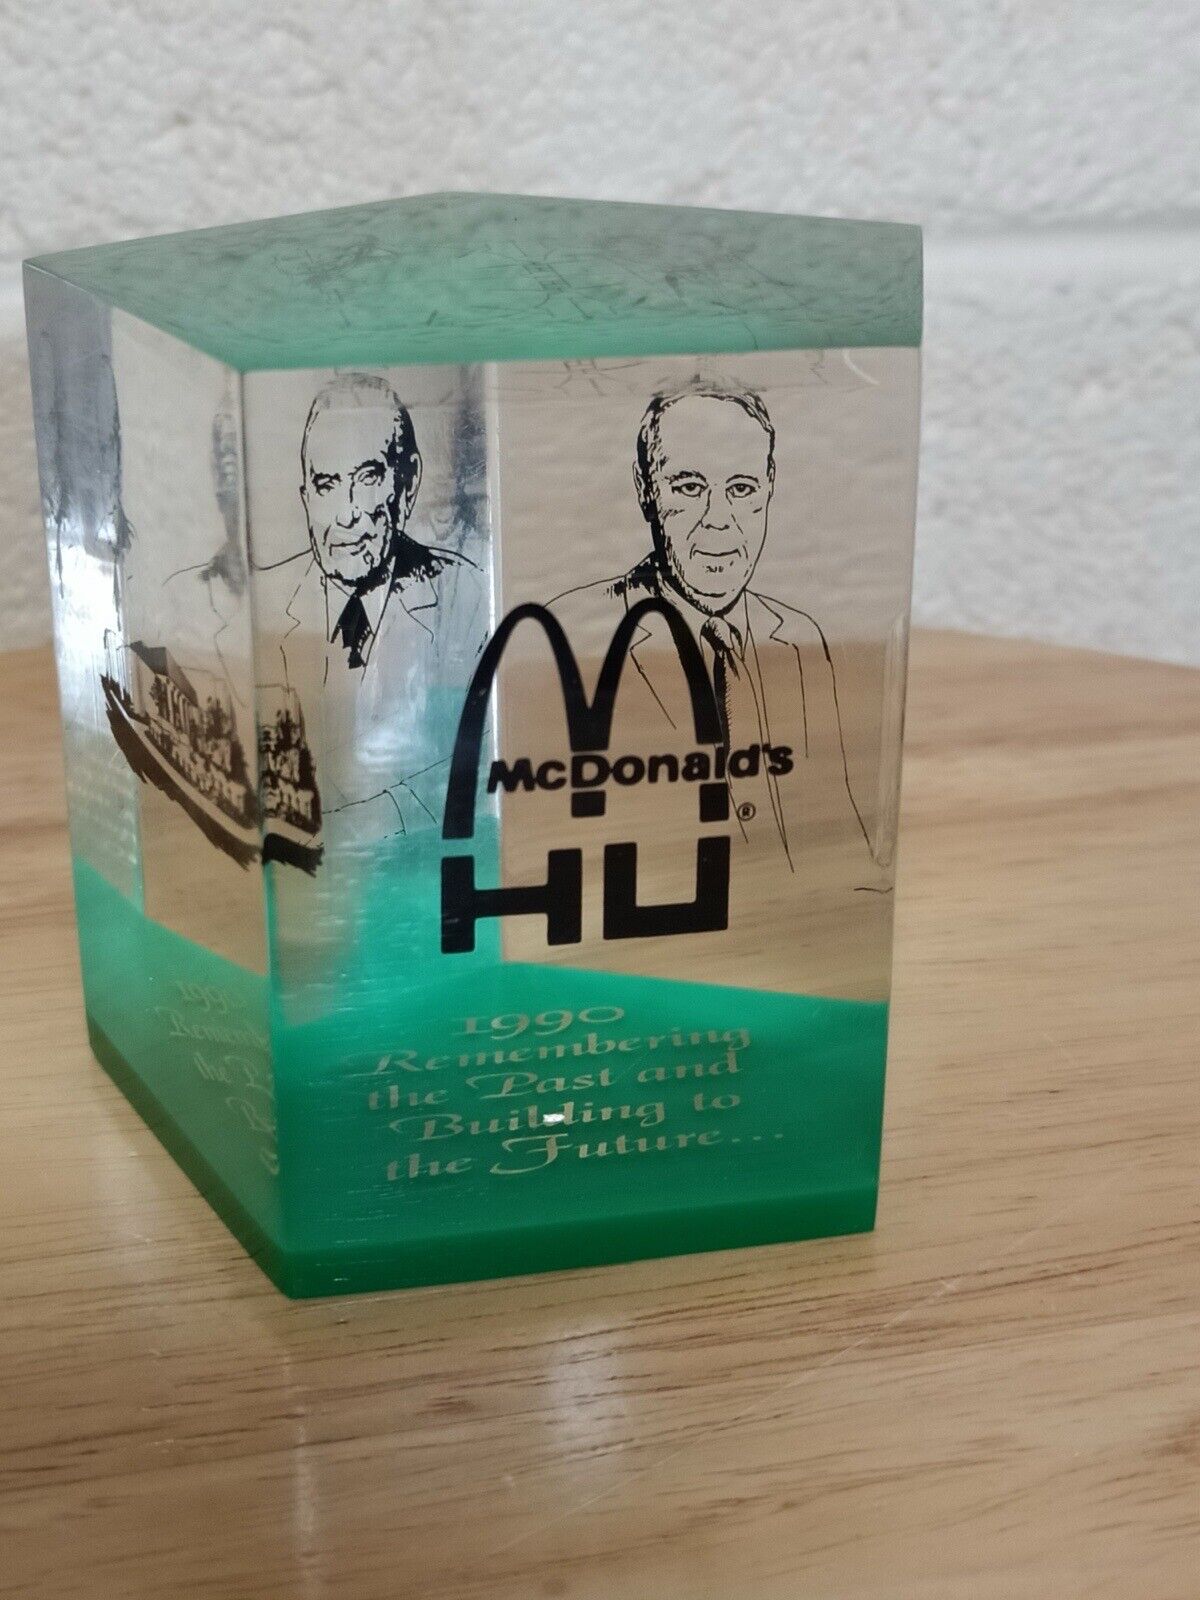 MCDONALDS COLLECTIBLE GLASS SCULPTURE - ETCHED CAMEO ART PIECE CEO GIFT